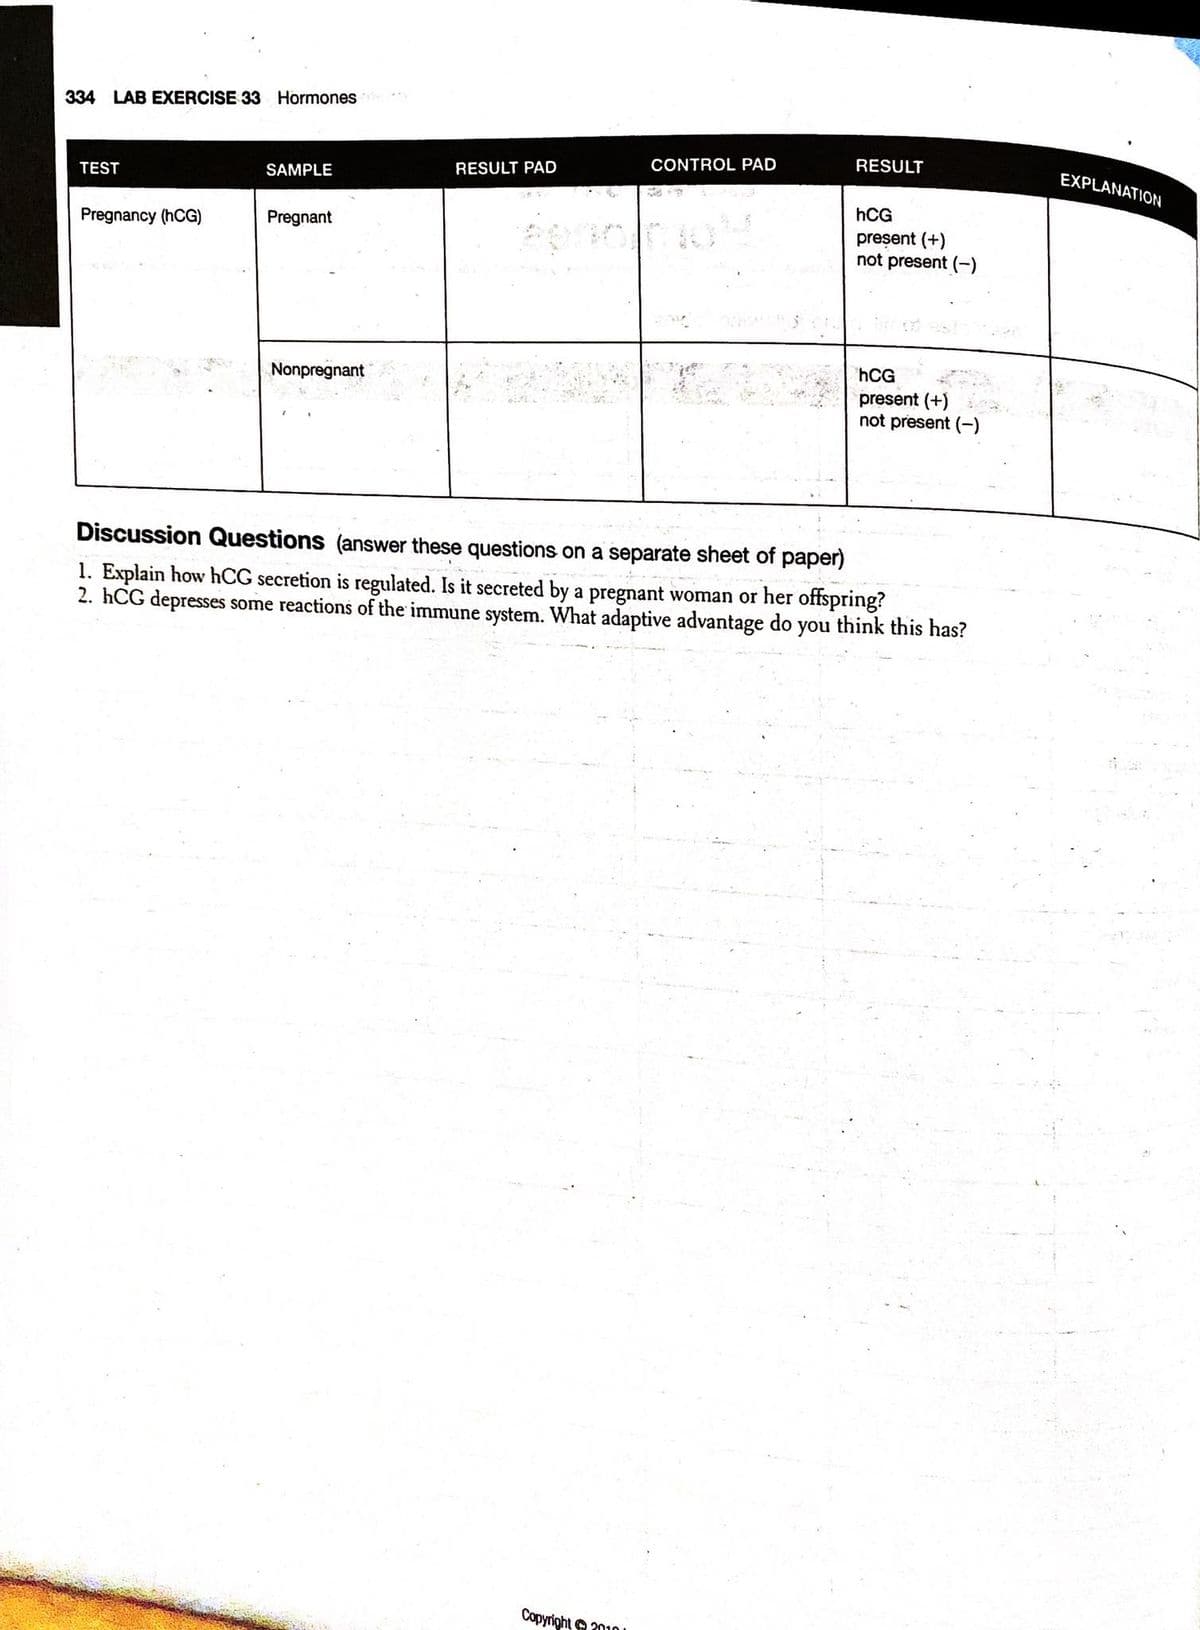 334 LAB EXERCISE 33 Hormonesty
CONTROL PAD
RESULT
RESULT PAD
TEST
SAMPLE
hCG
Pregnancy (hCG)
Pregnant
present (+)
not present (-)
hCG
Nonpregnant
present (+)
not present (-)
Discussion Questions (answer these questions on a separate sheet of paper)
1. Explain how hCG secretion is regulated. Is it secreted by a pregnant woman or her offspring?
2. hCG depresses some reactions of the immune system. What adaptive advantage do you think this has?
Copyright 2010
EXPLANATION